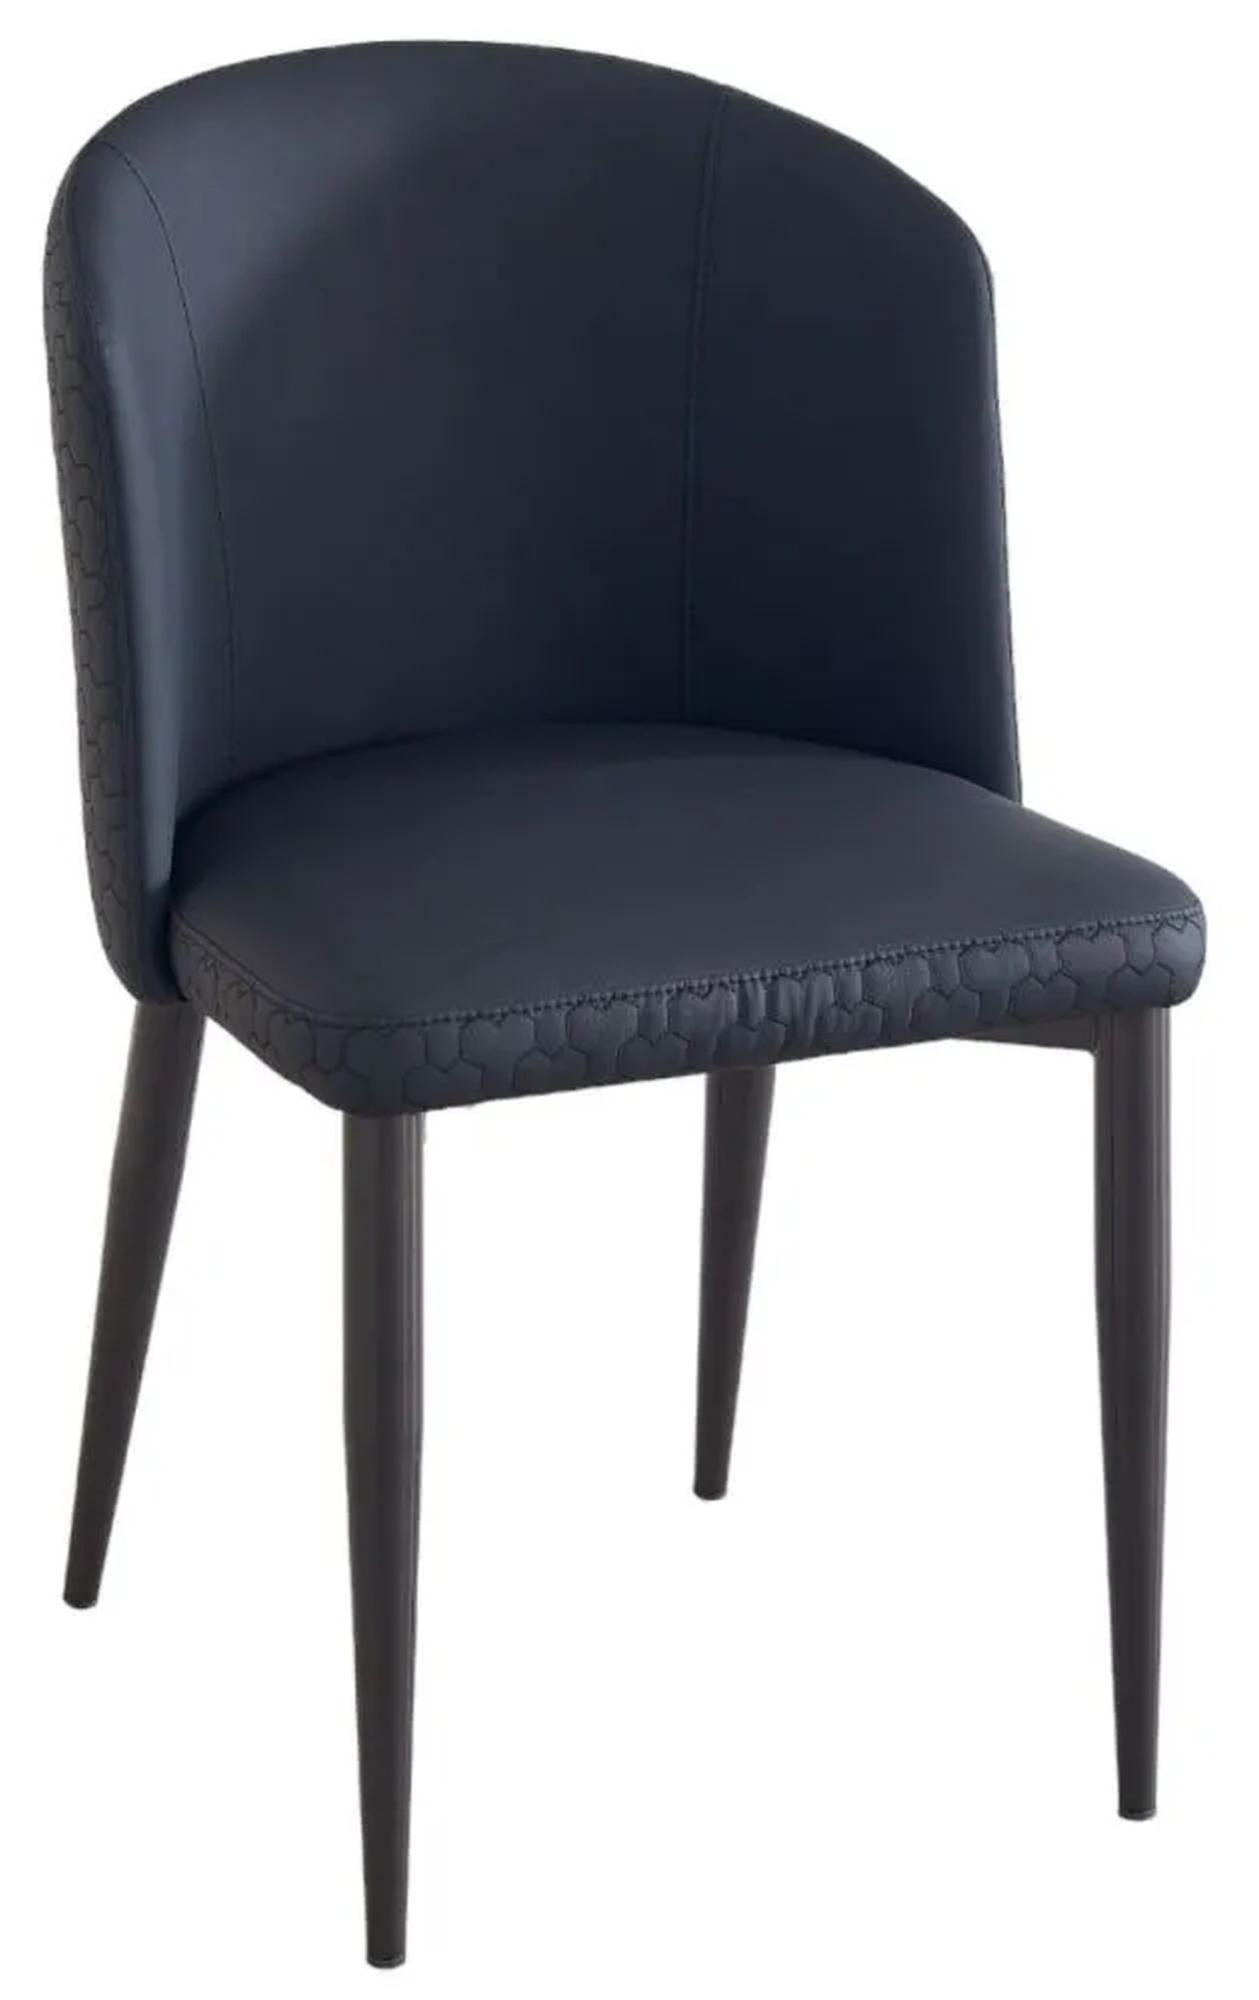 Deco Black Faux Leather High Back Dining Chair with Black Legs